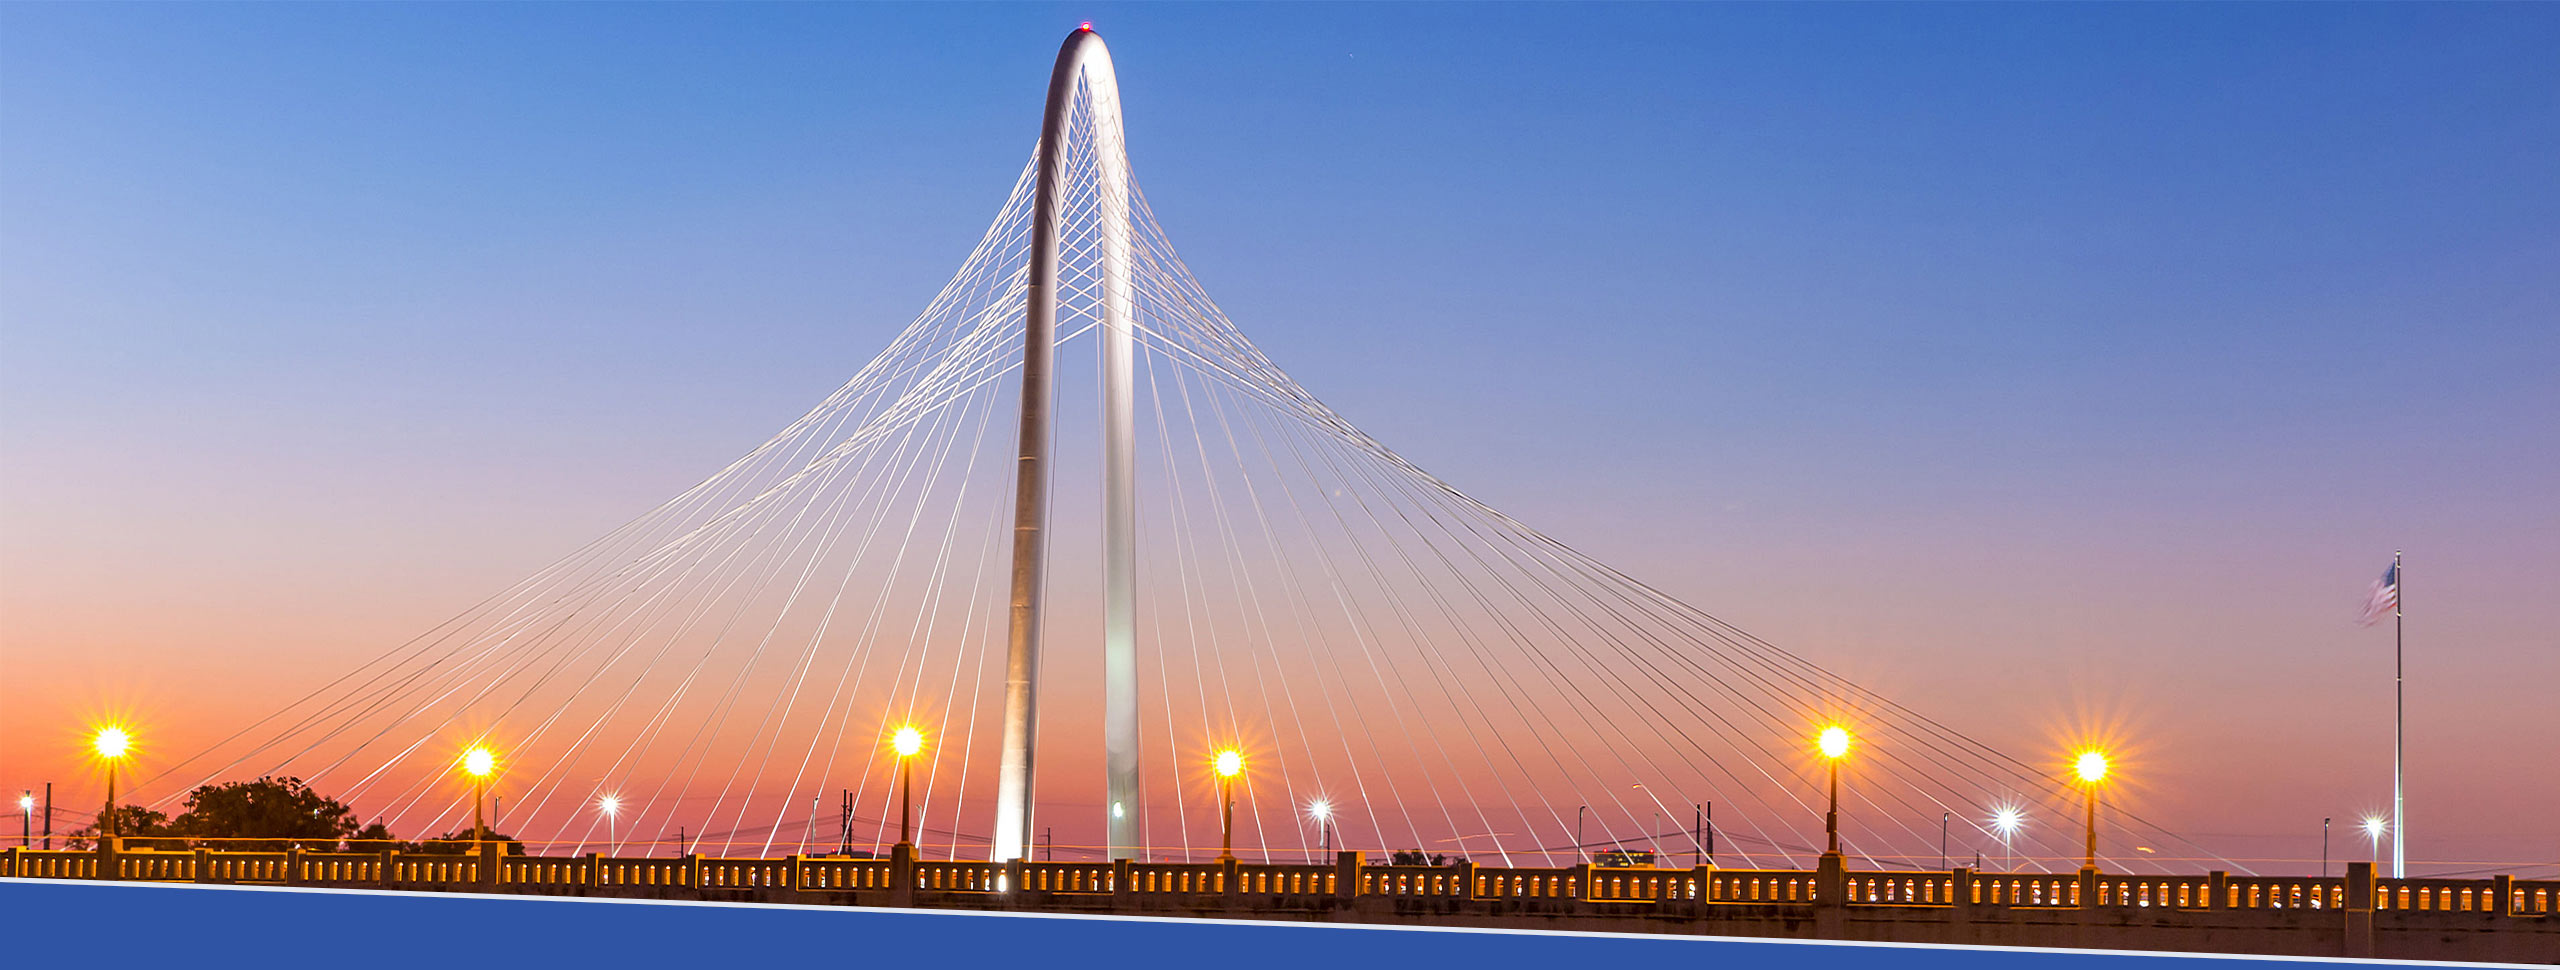 Sunrise at Margaret Hunt Hill Bridge, with Ronald Kirk Pedestrian Brigde in the foreground. Dallas, Texas.